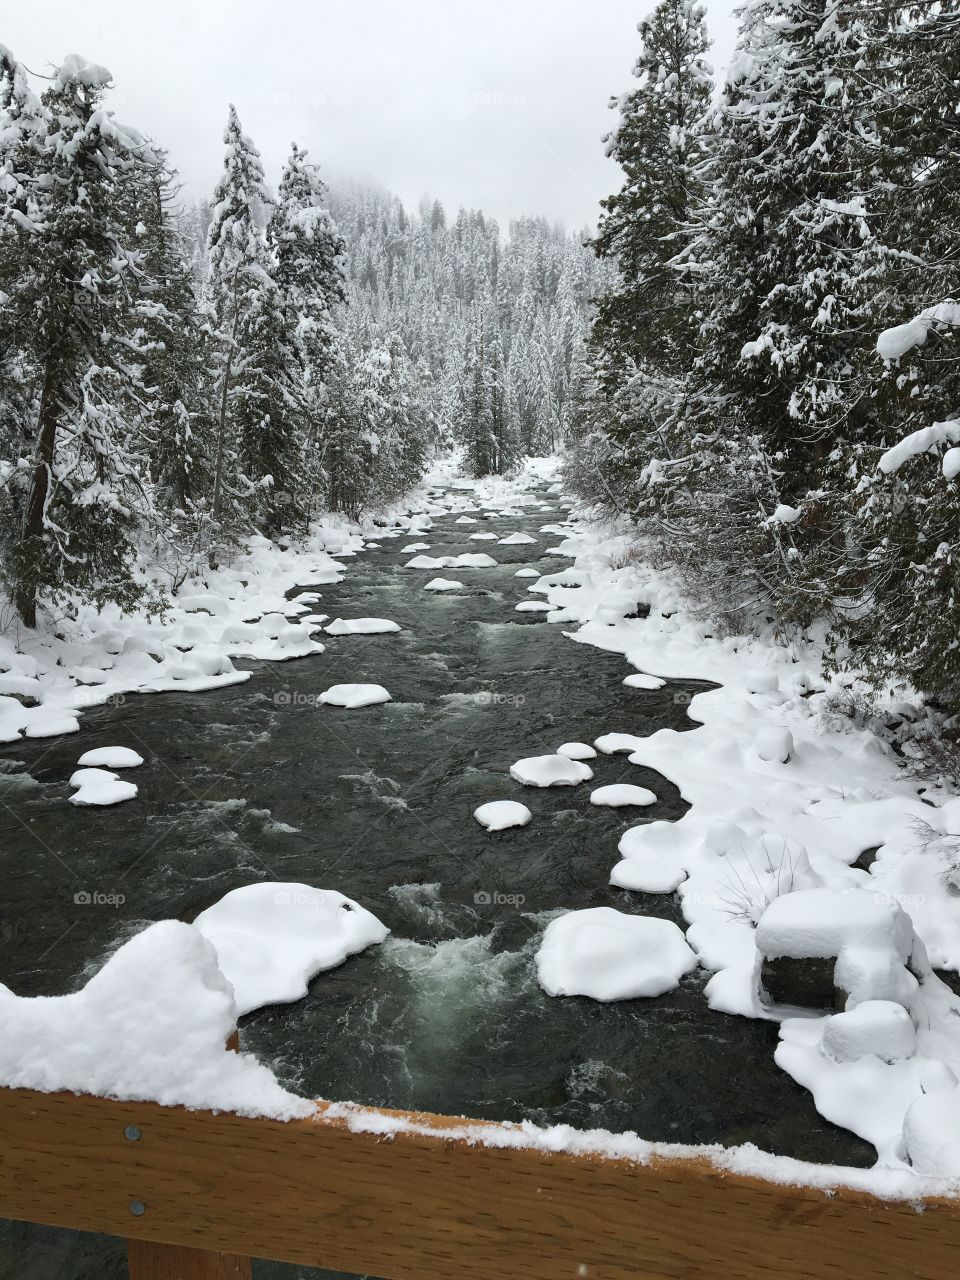 Mountain creek in winter with snow